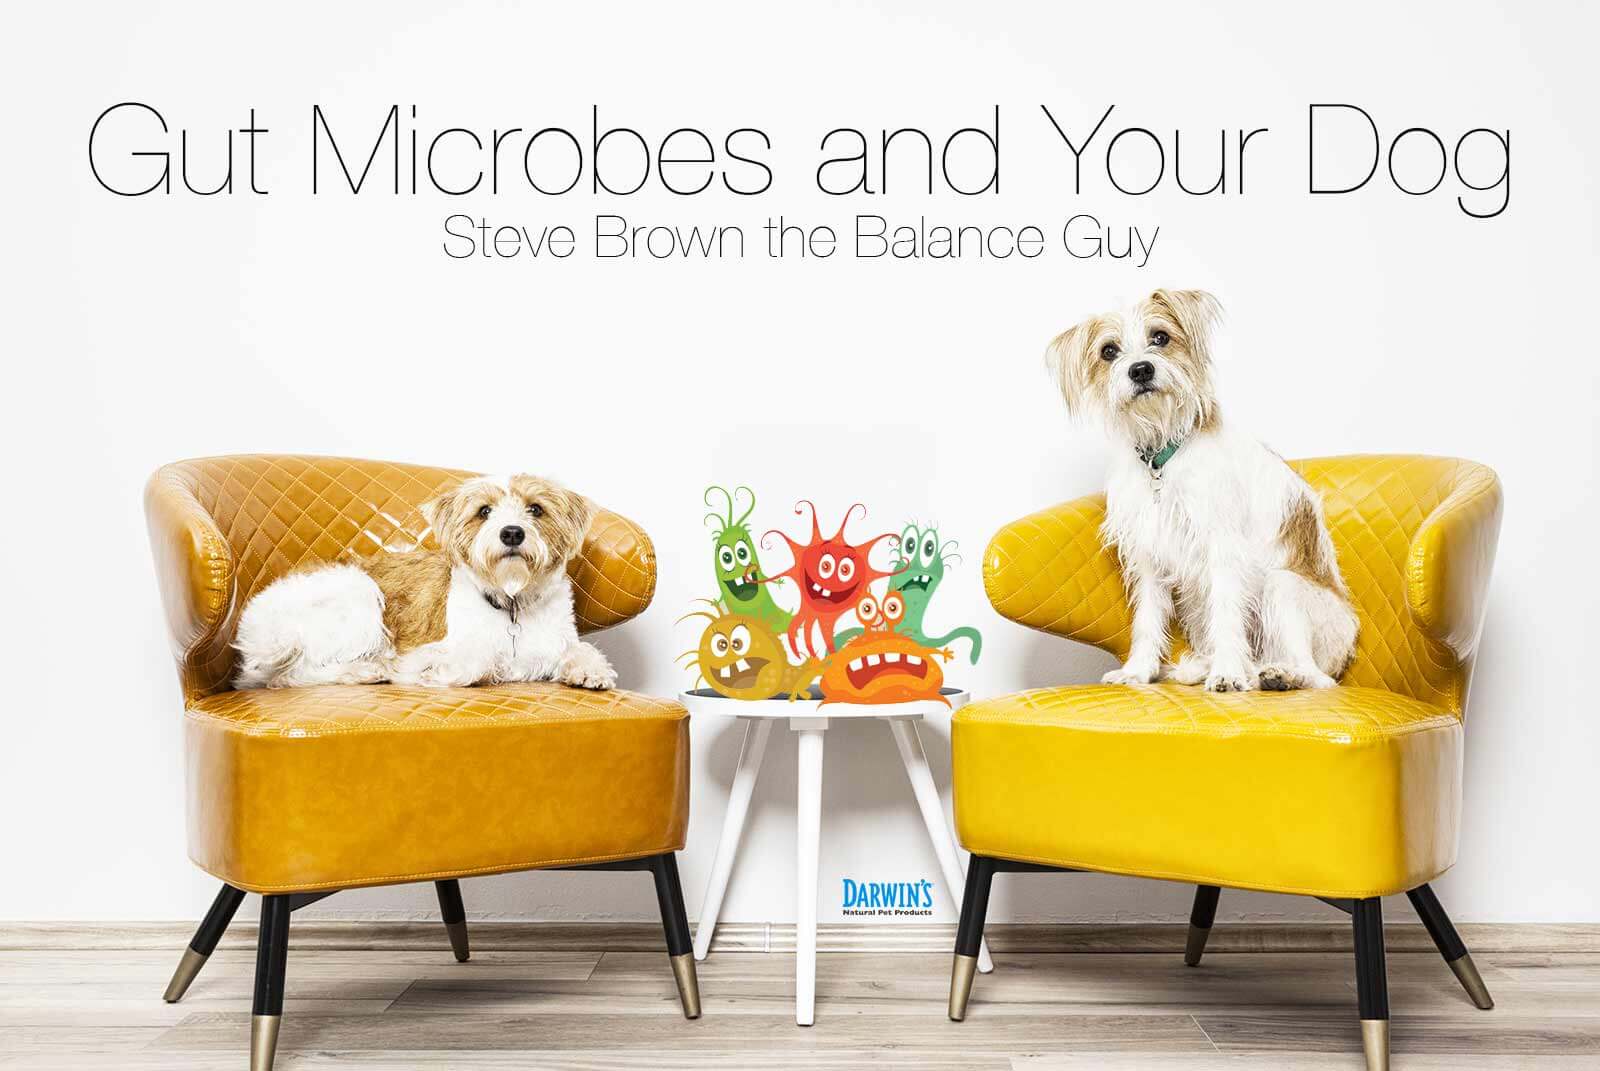 Gut Microbes and Your Dog